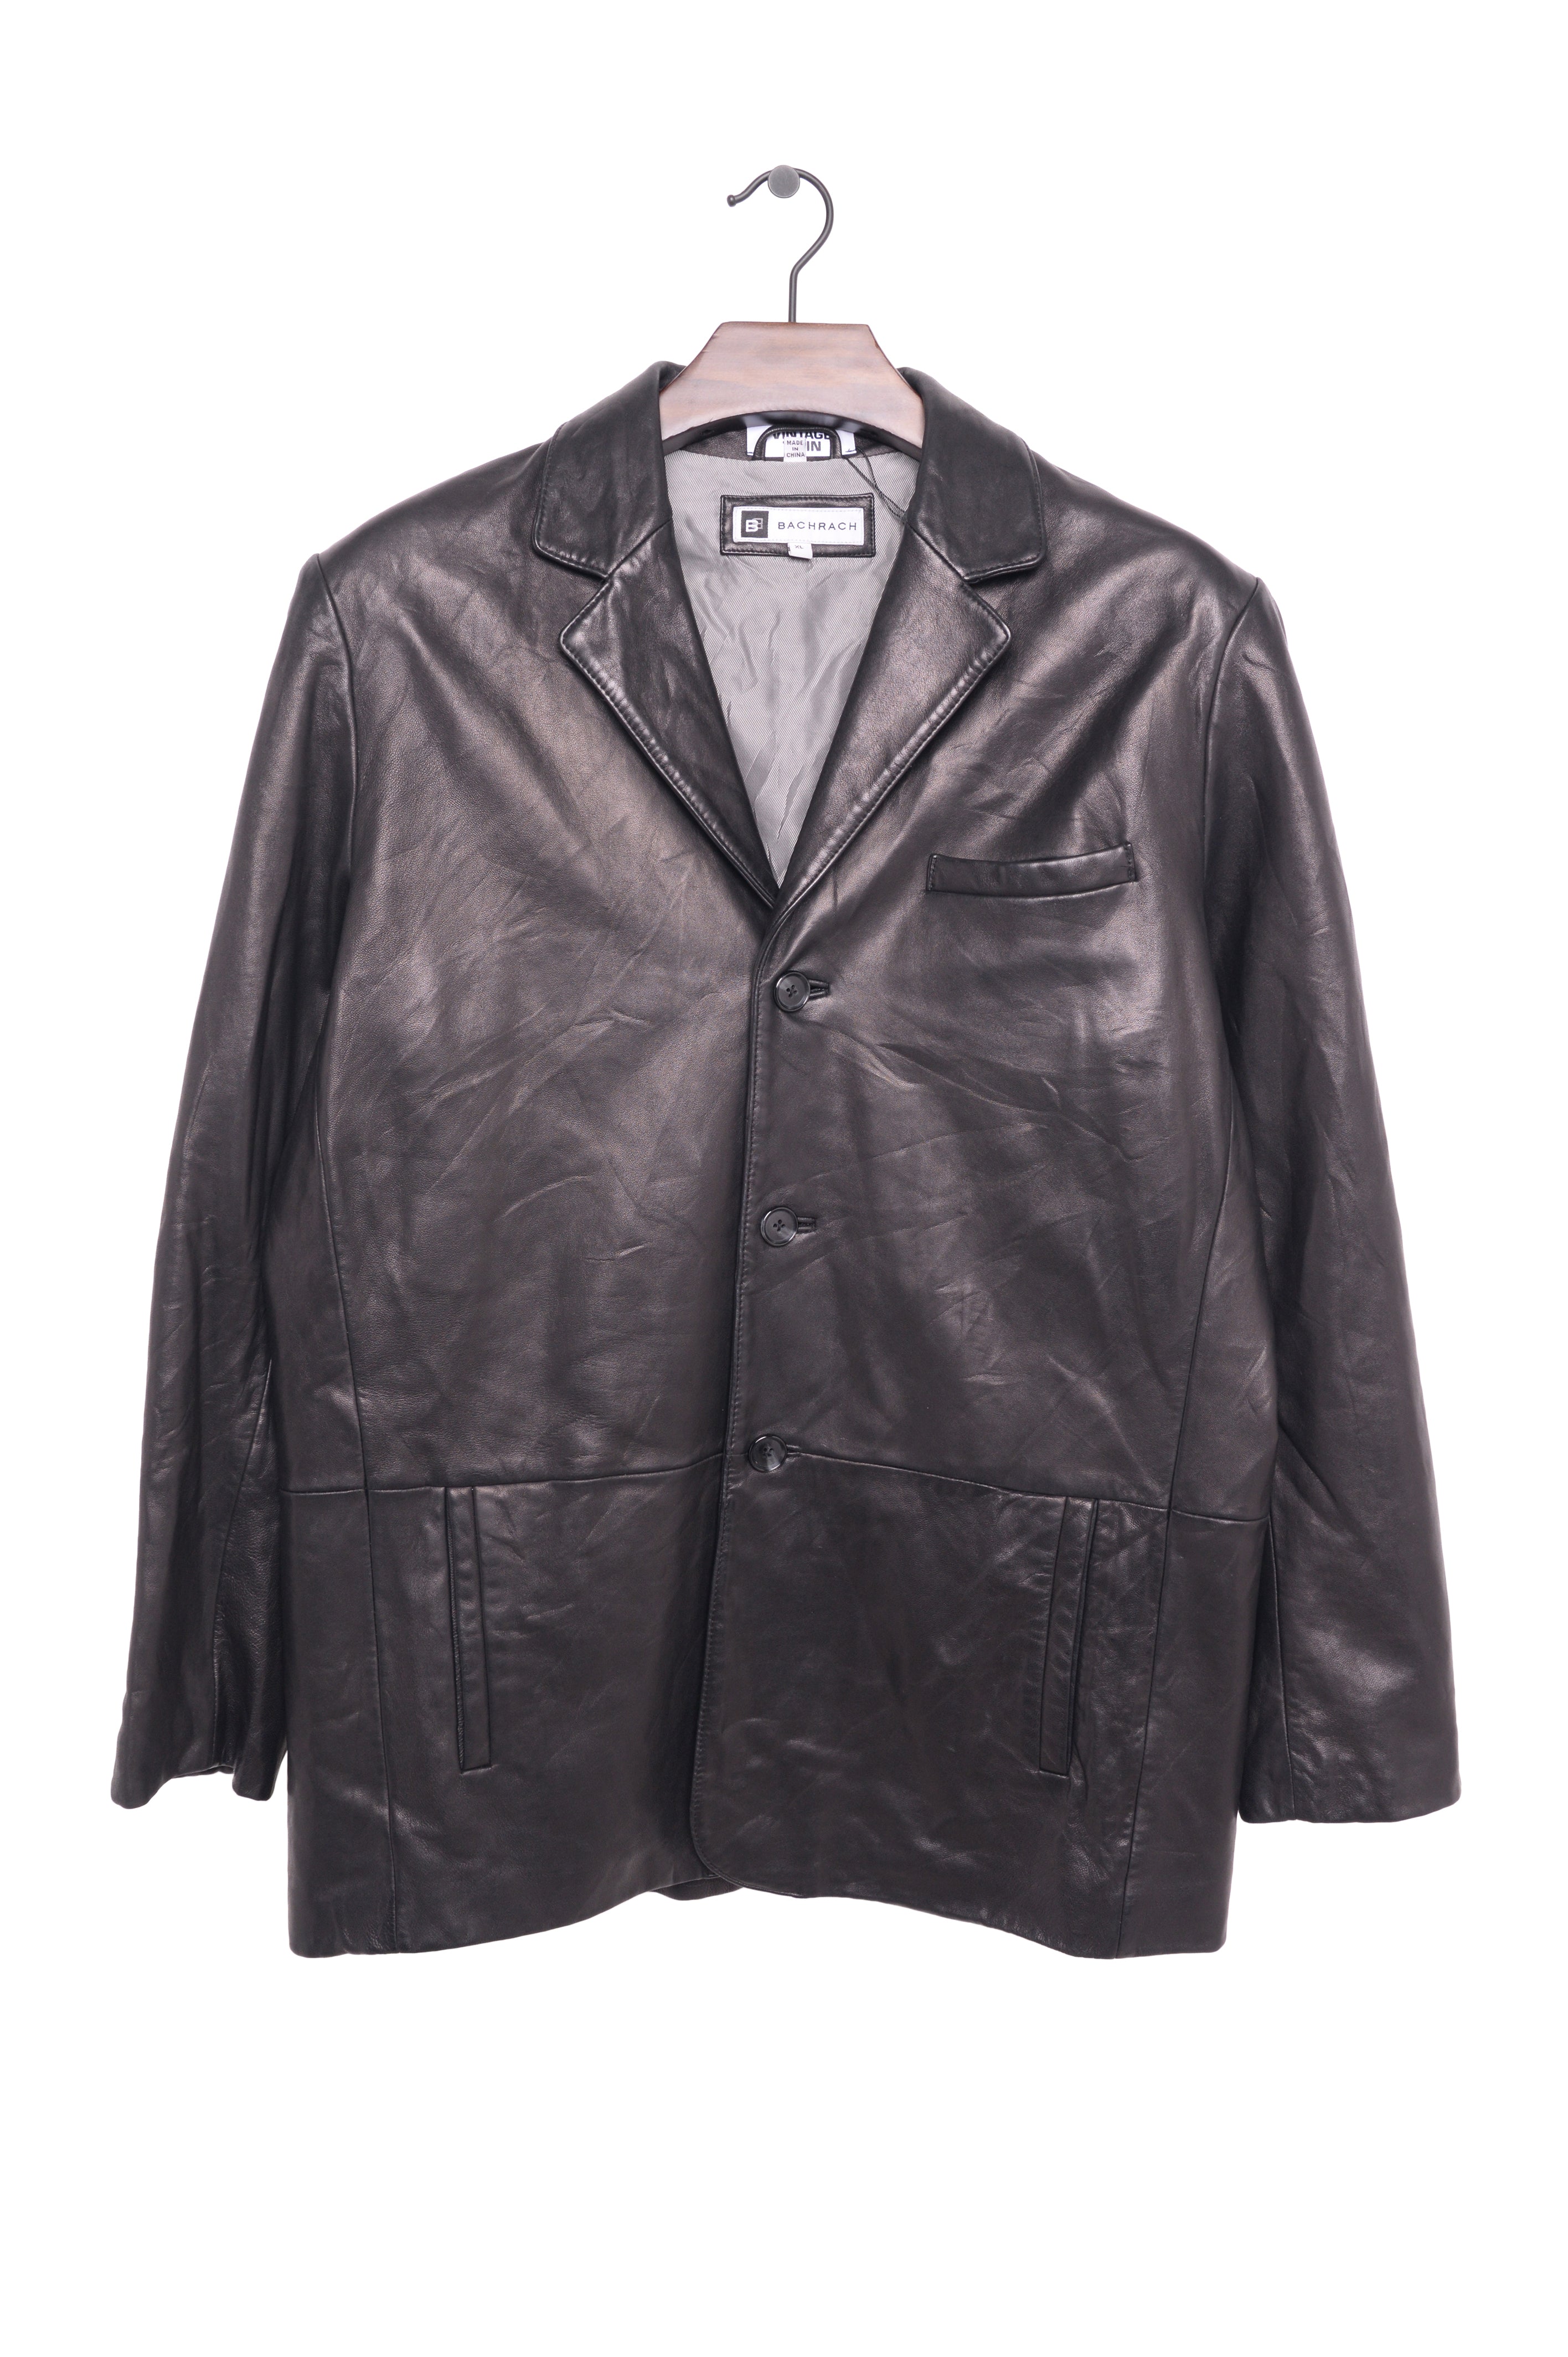 Soft Button Leather Jacket Free Shipping - The Vintage Twin